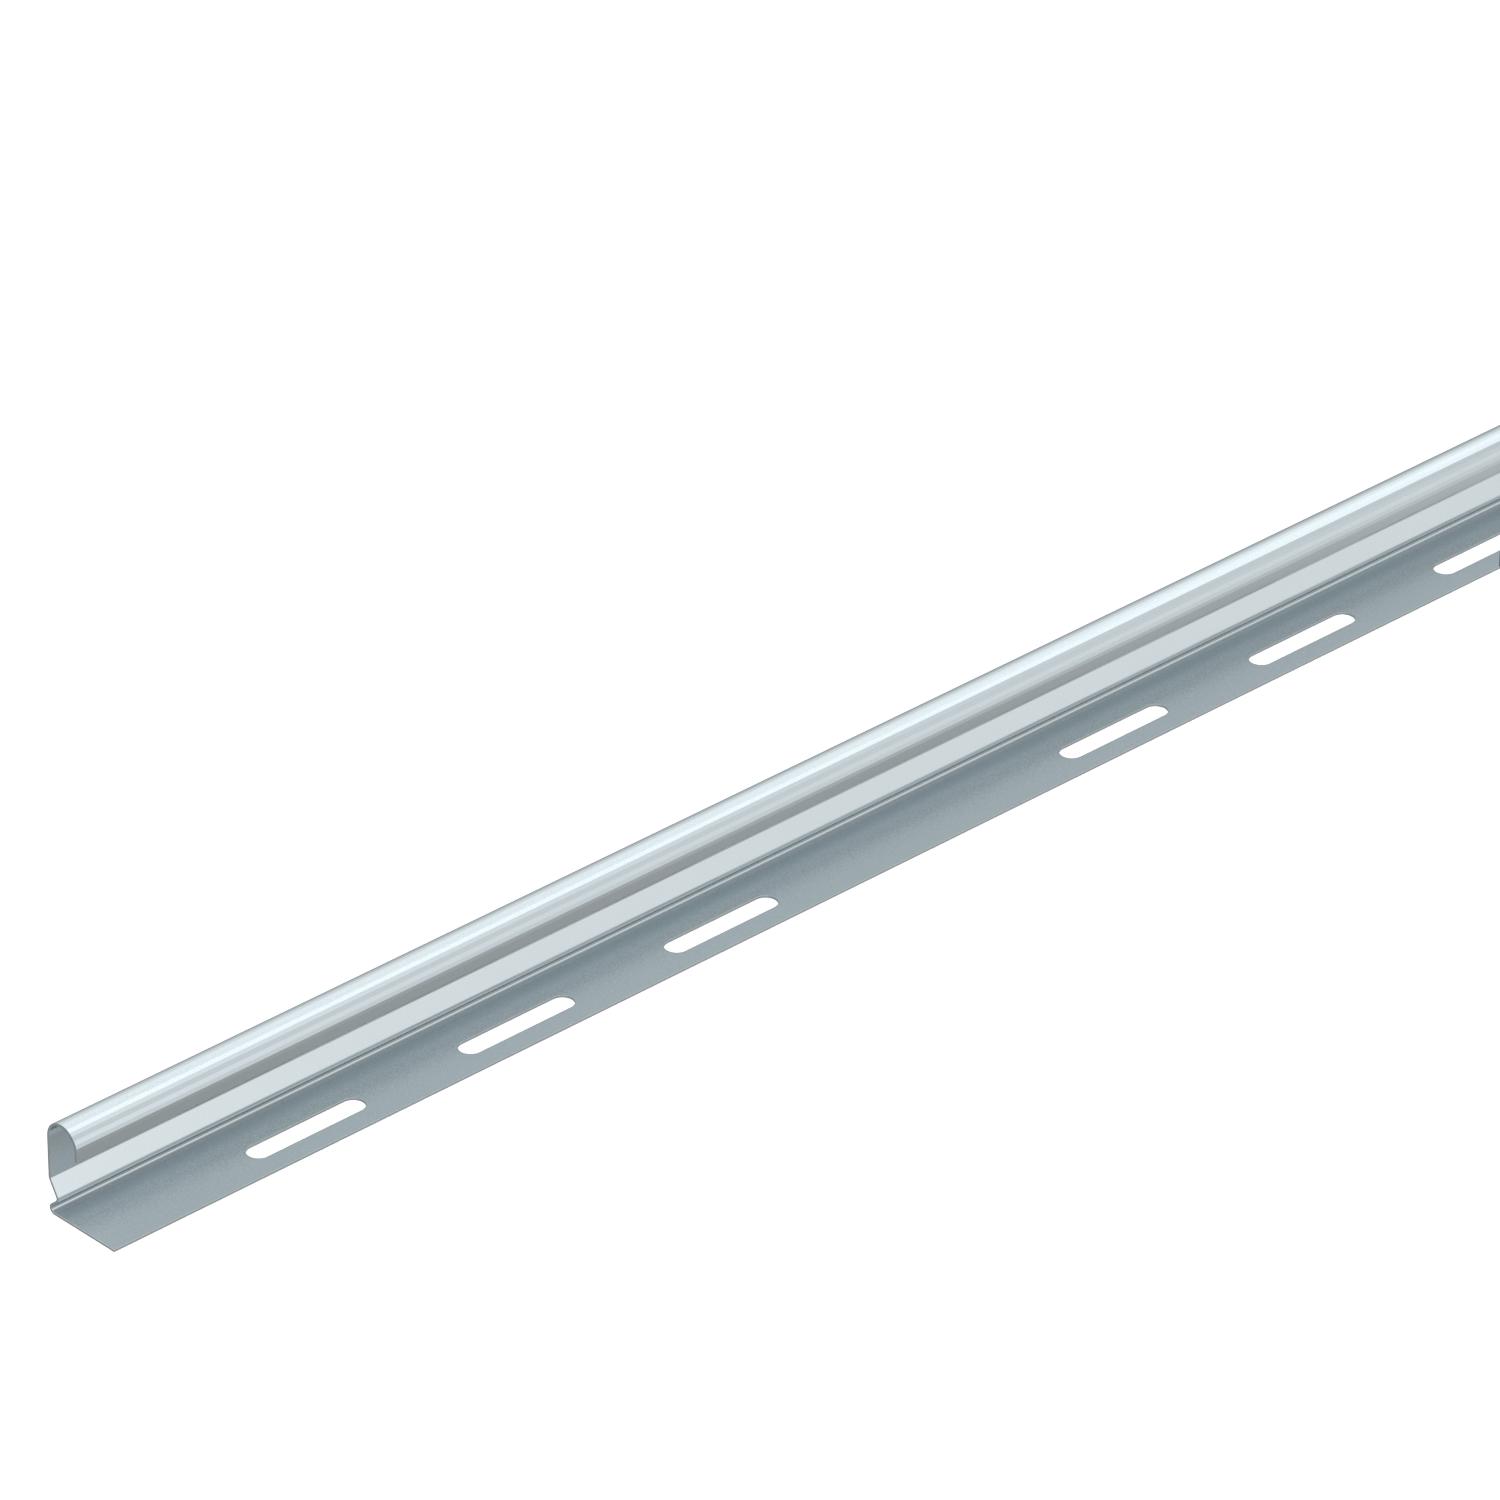 Cable Tray Dividers - Barrier Cable Systems